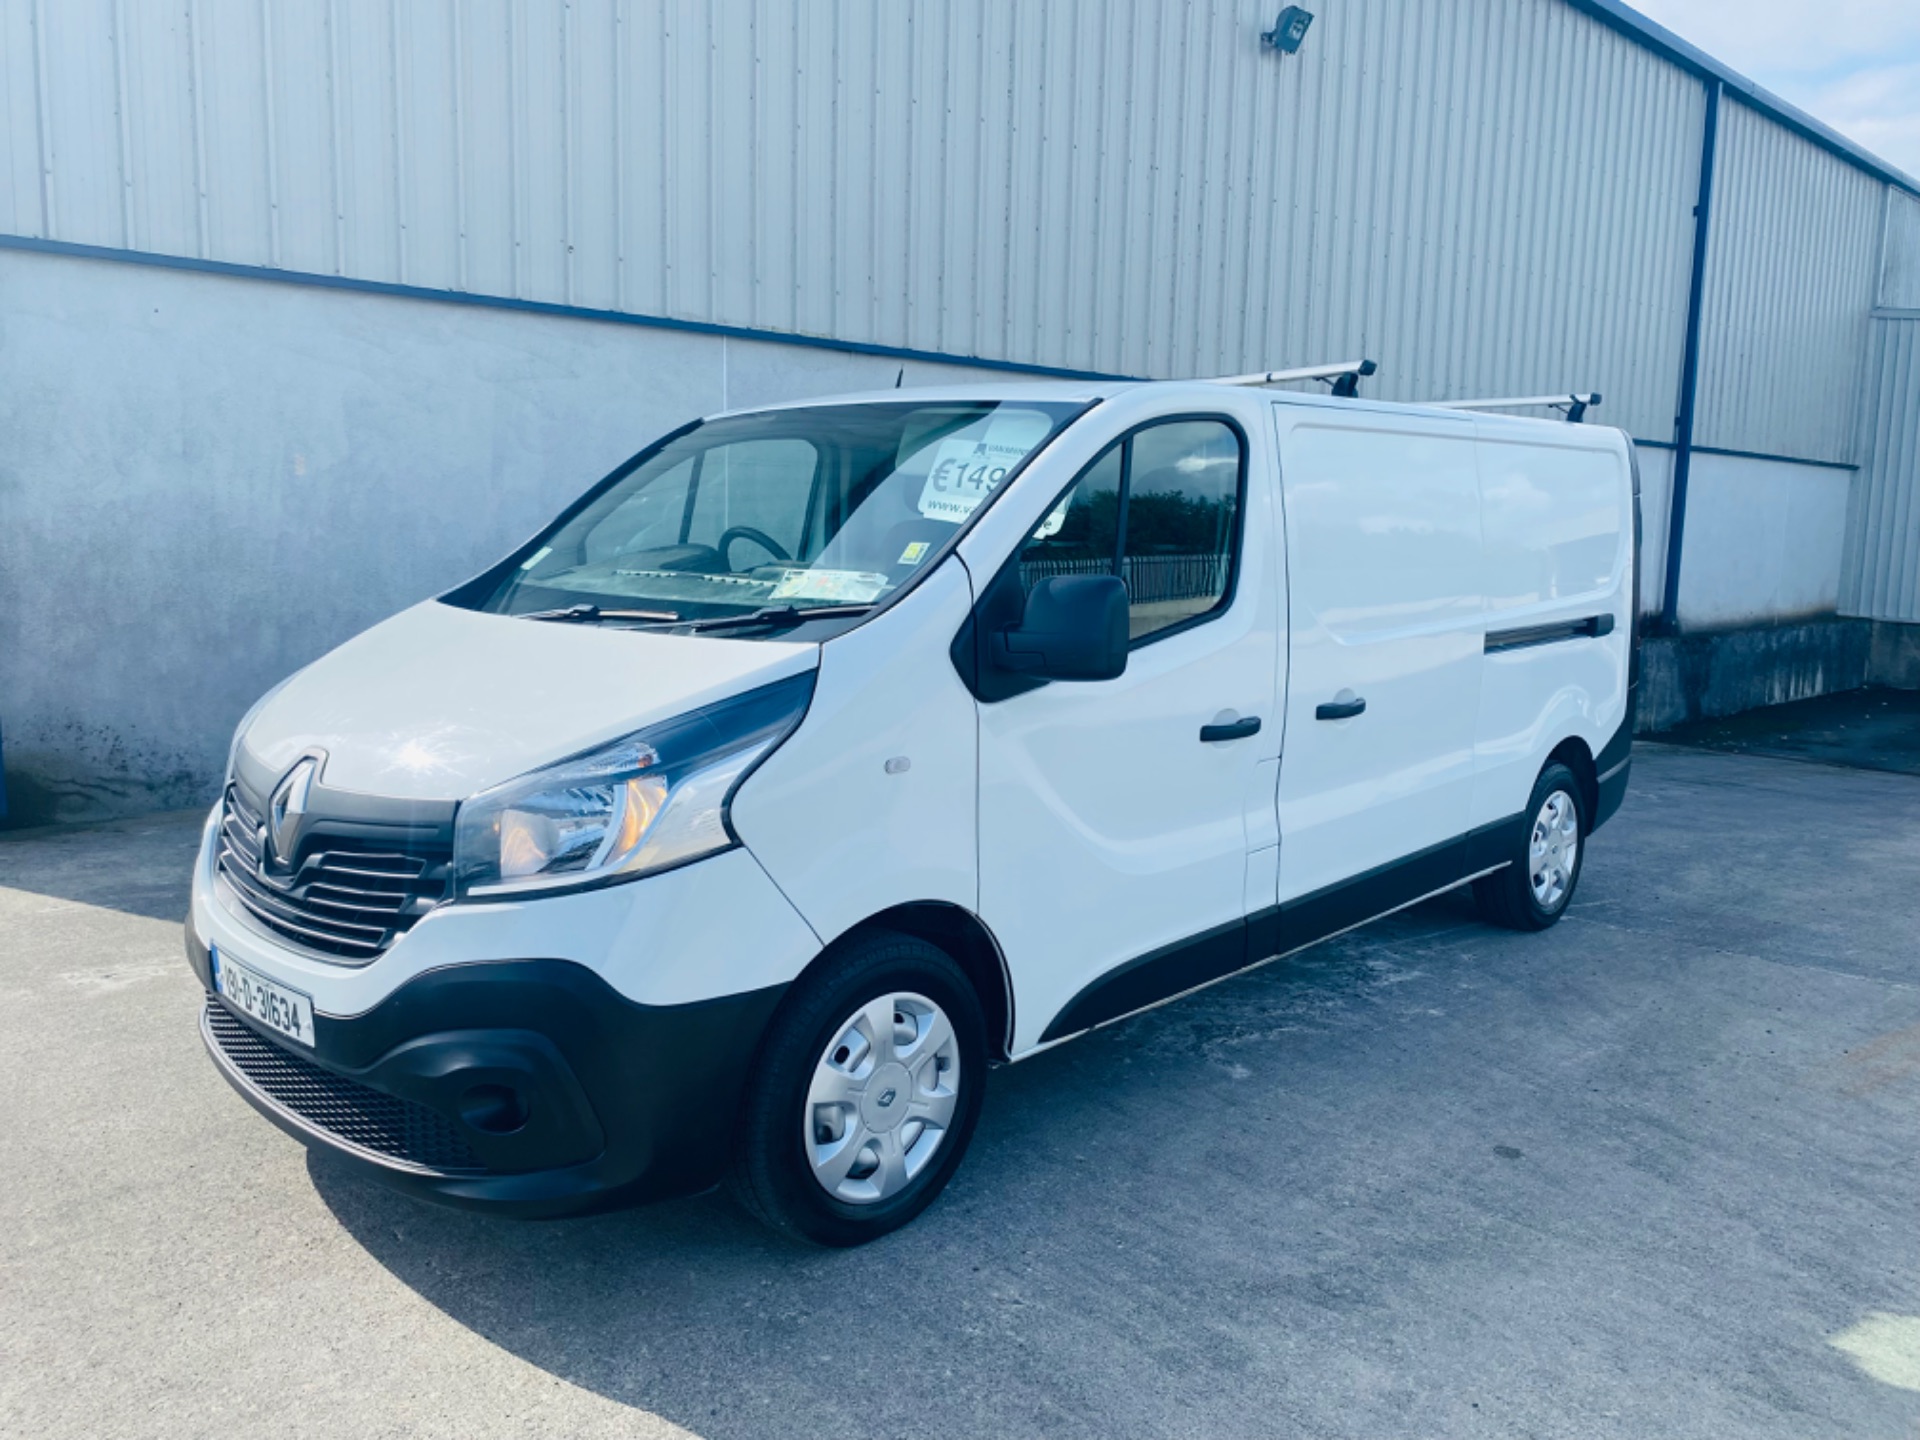 2019 Renault Trafic LL29 DCI 120 Business (191D31634)